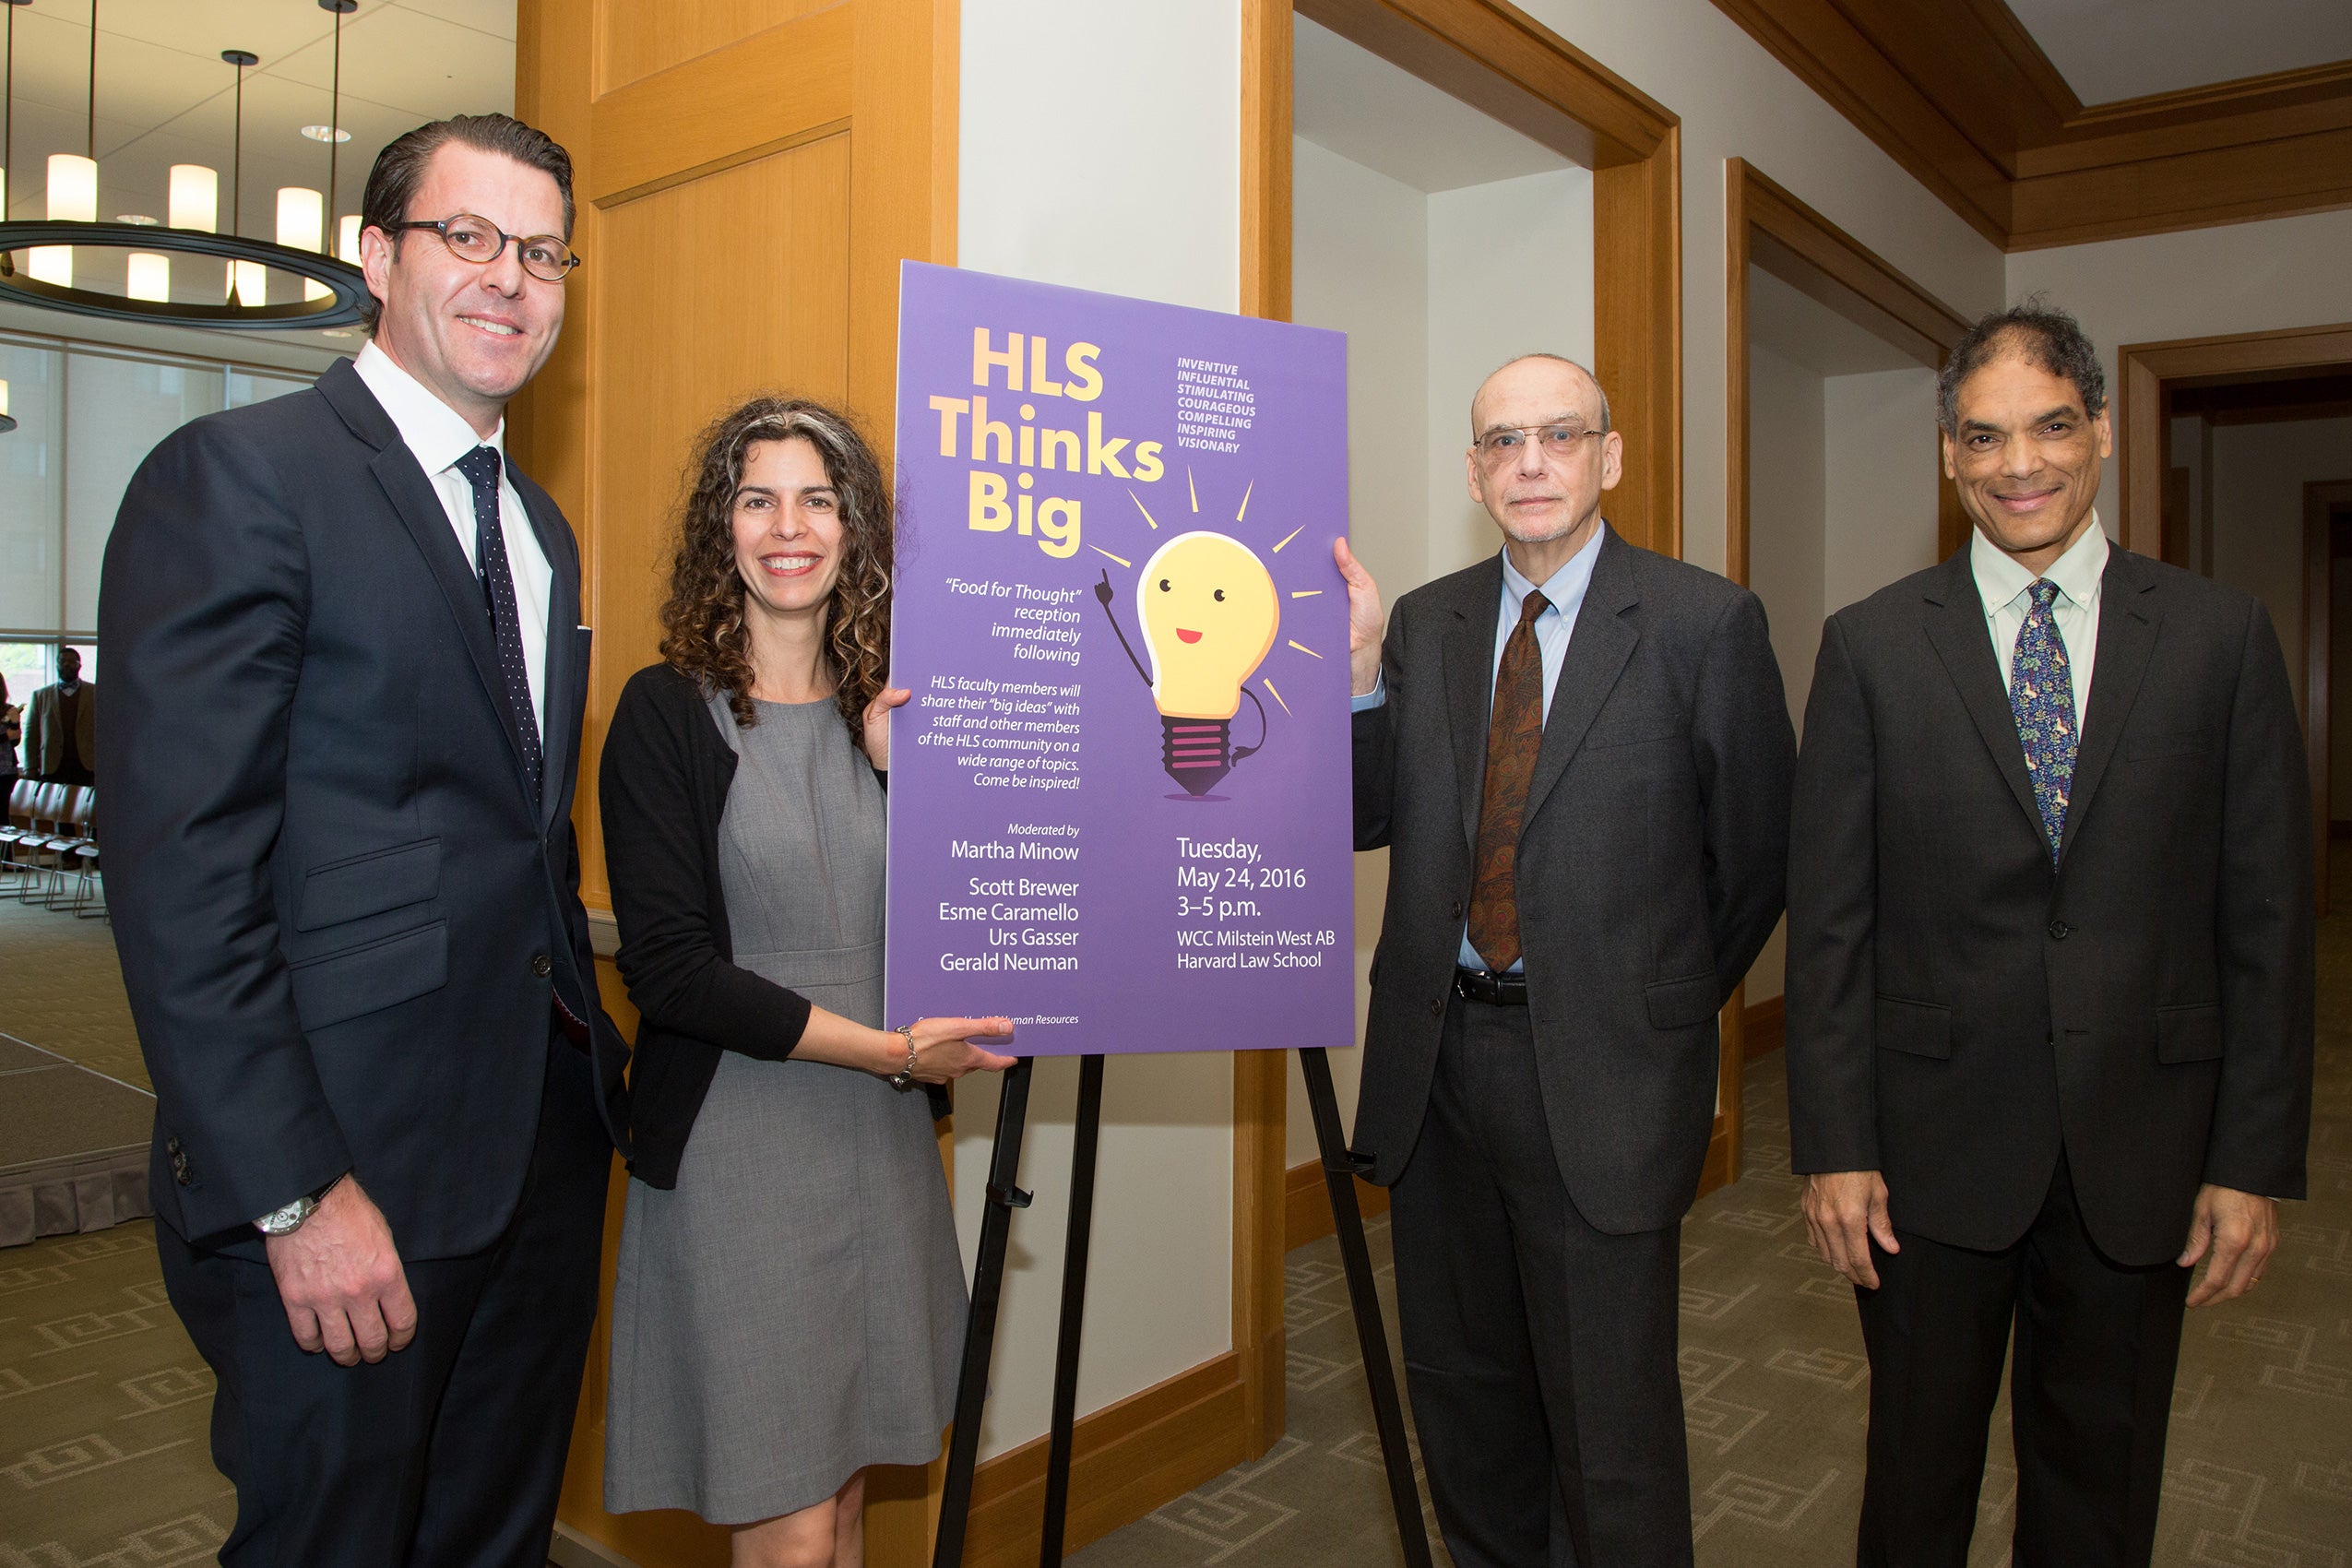 4 attendees standing beside an HLS Thinks Big sign